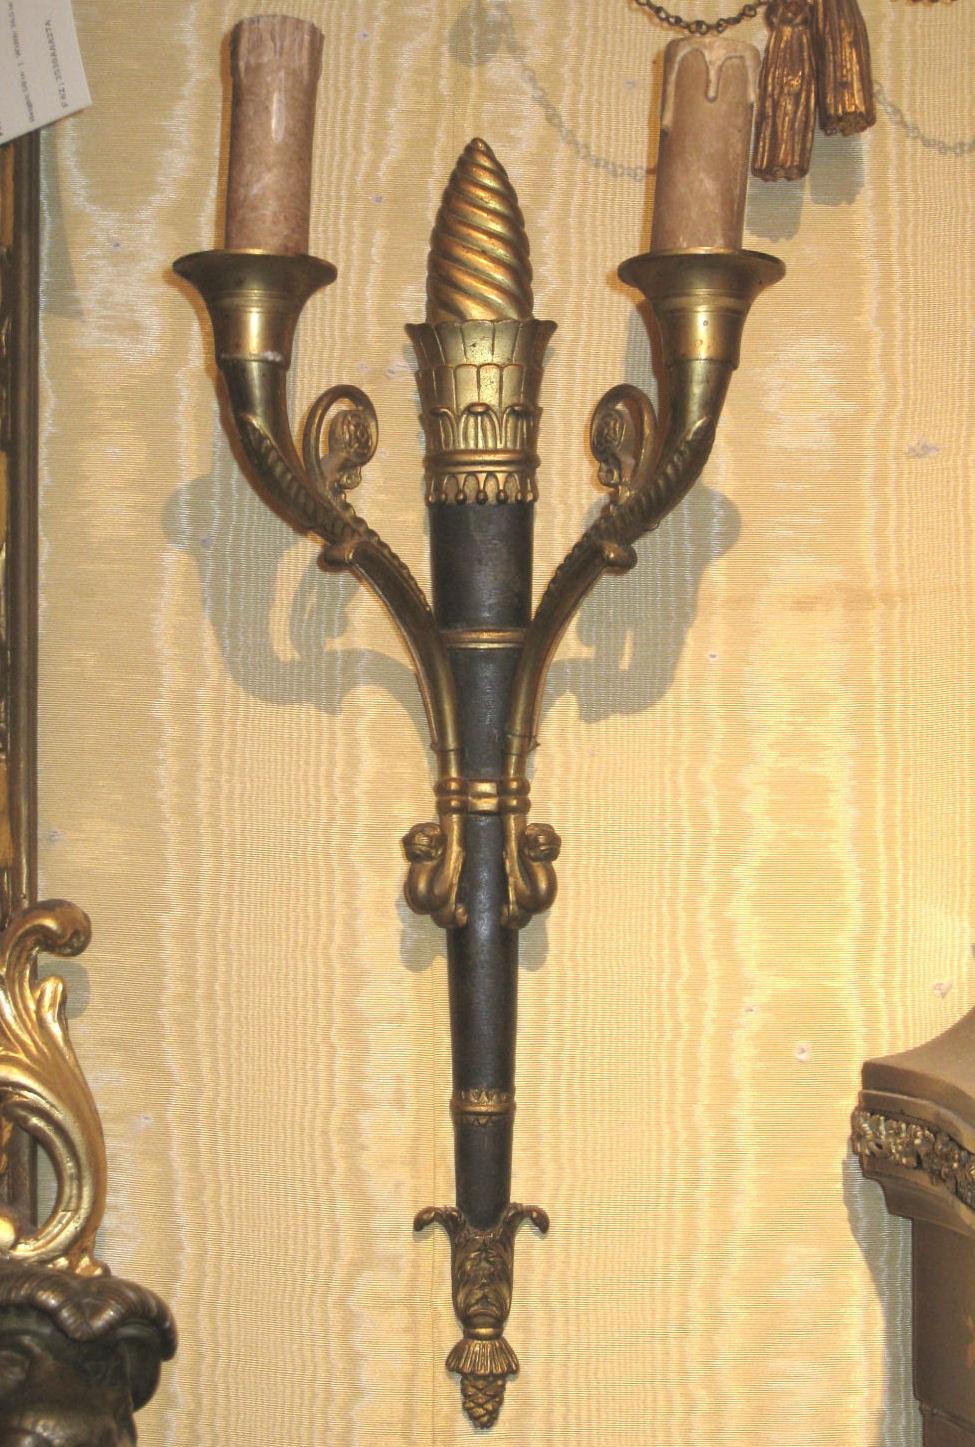 Pair of Gilt and Patinated Bronze Two-Arm Wall Light Sconces
Stock Number: L273